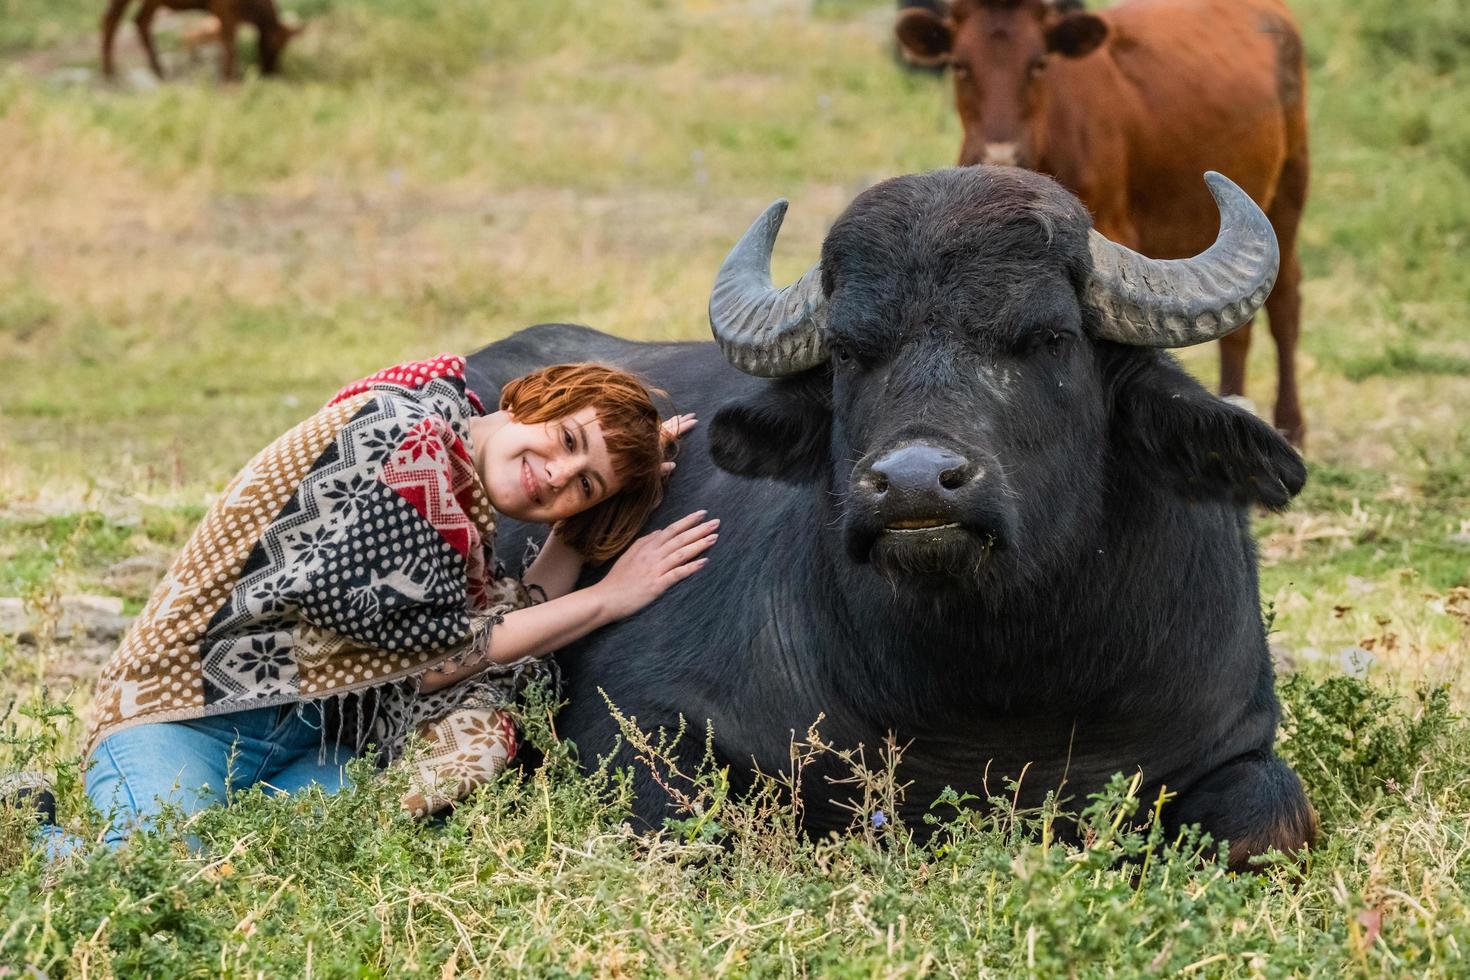 Young woman dressed in a poncho ride on big water buffalo photo